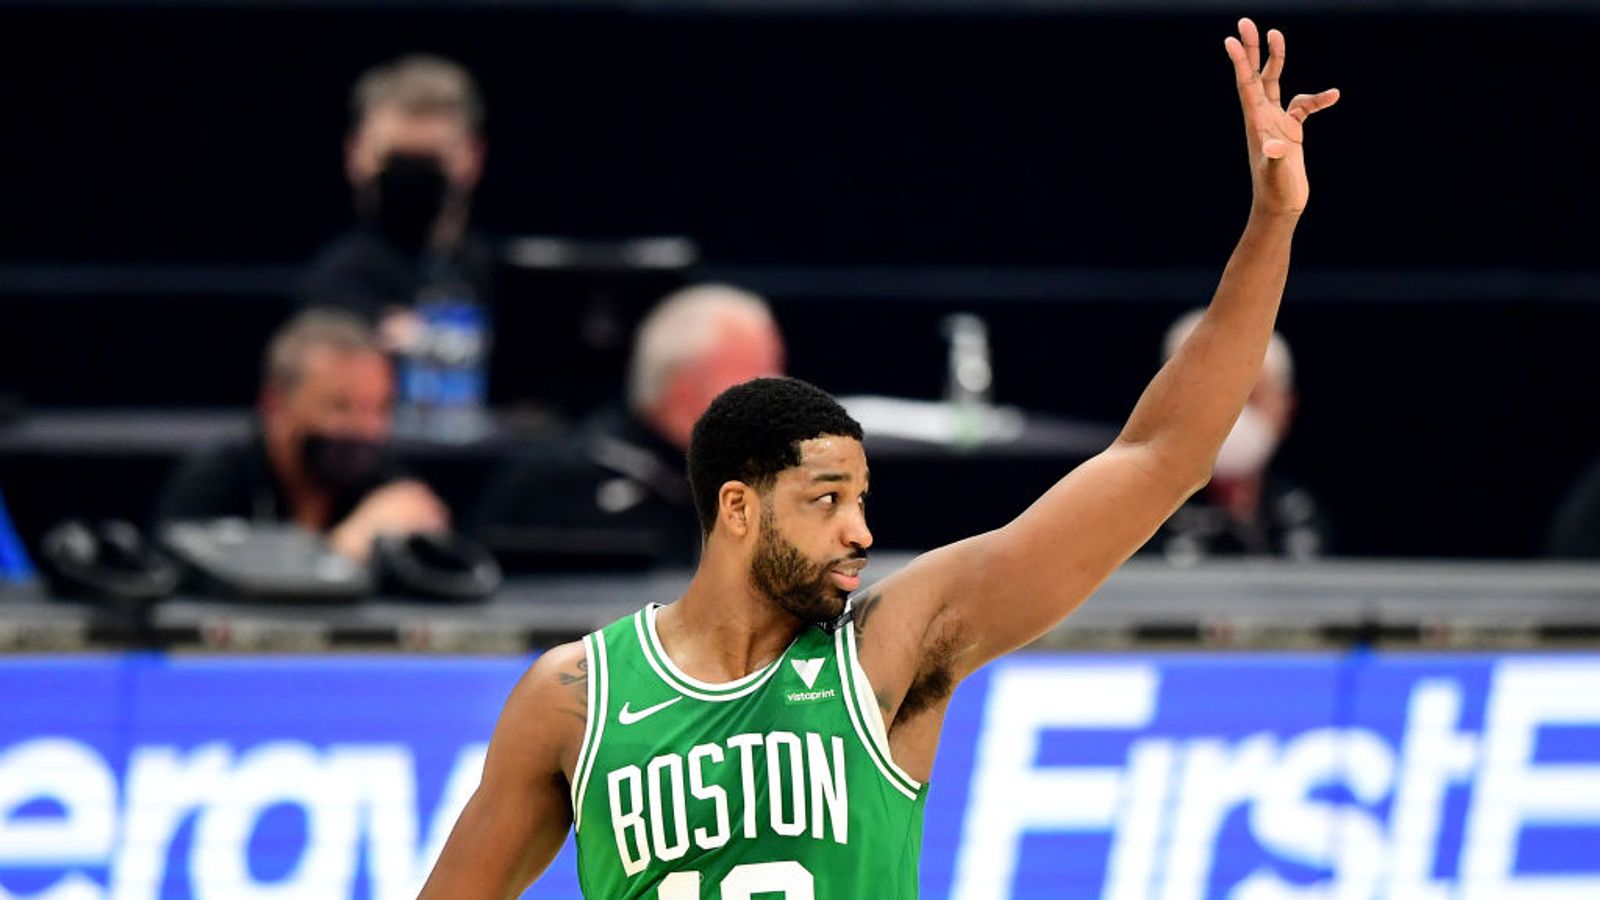 Kyrie Irving said he 'failed' his Celtics teammates in midst of